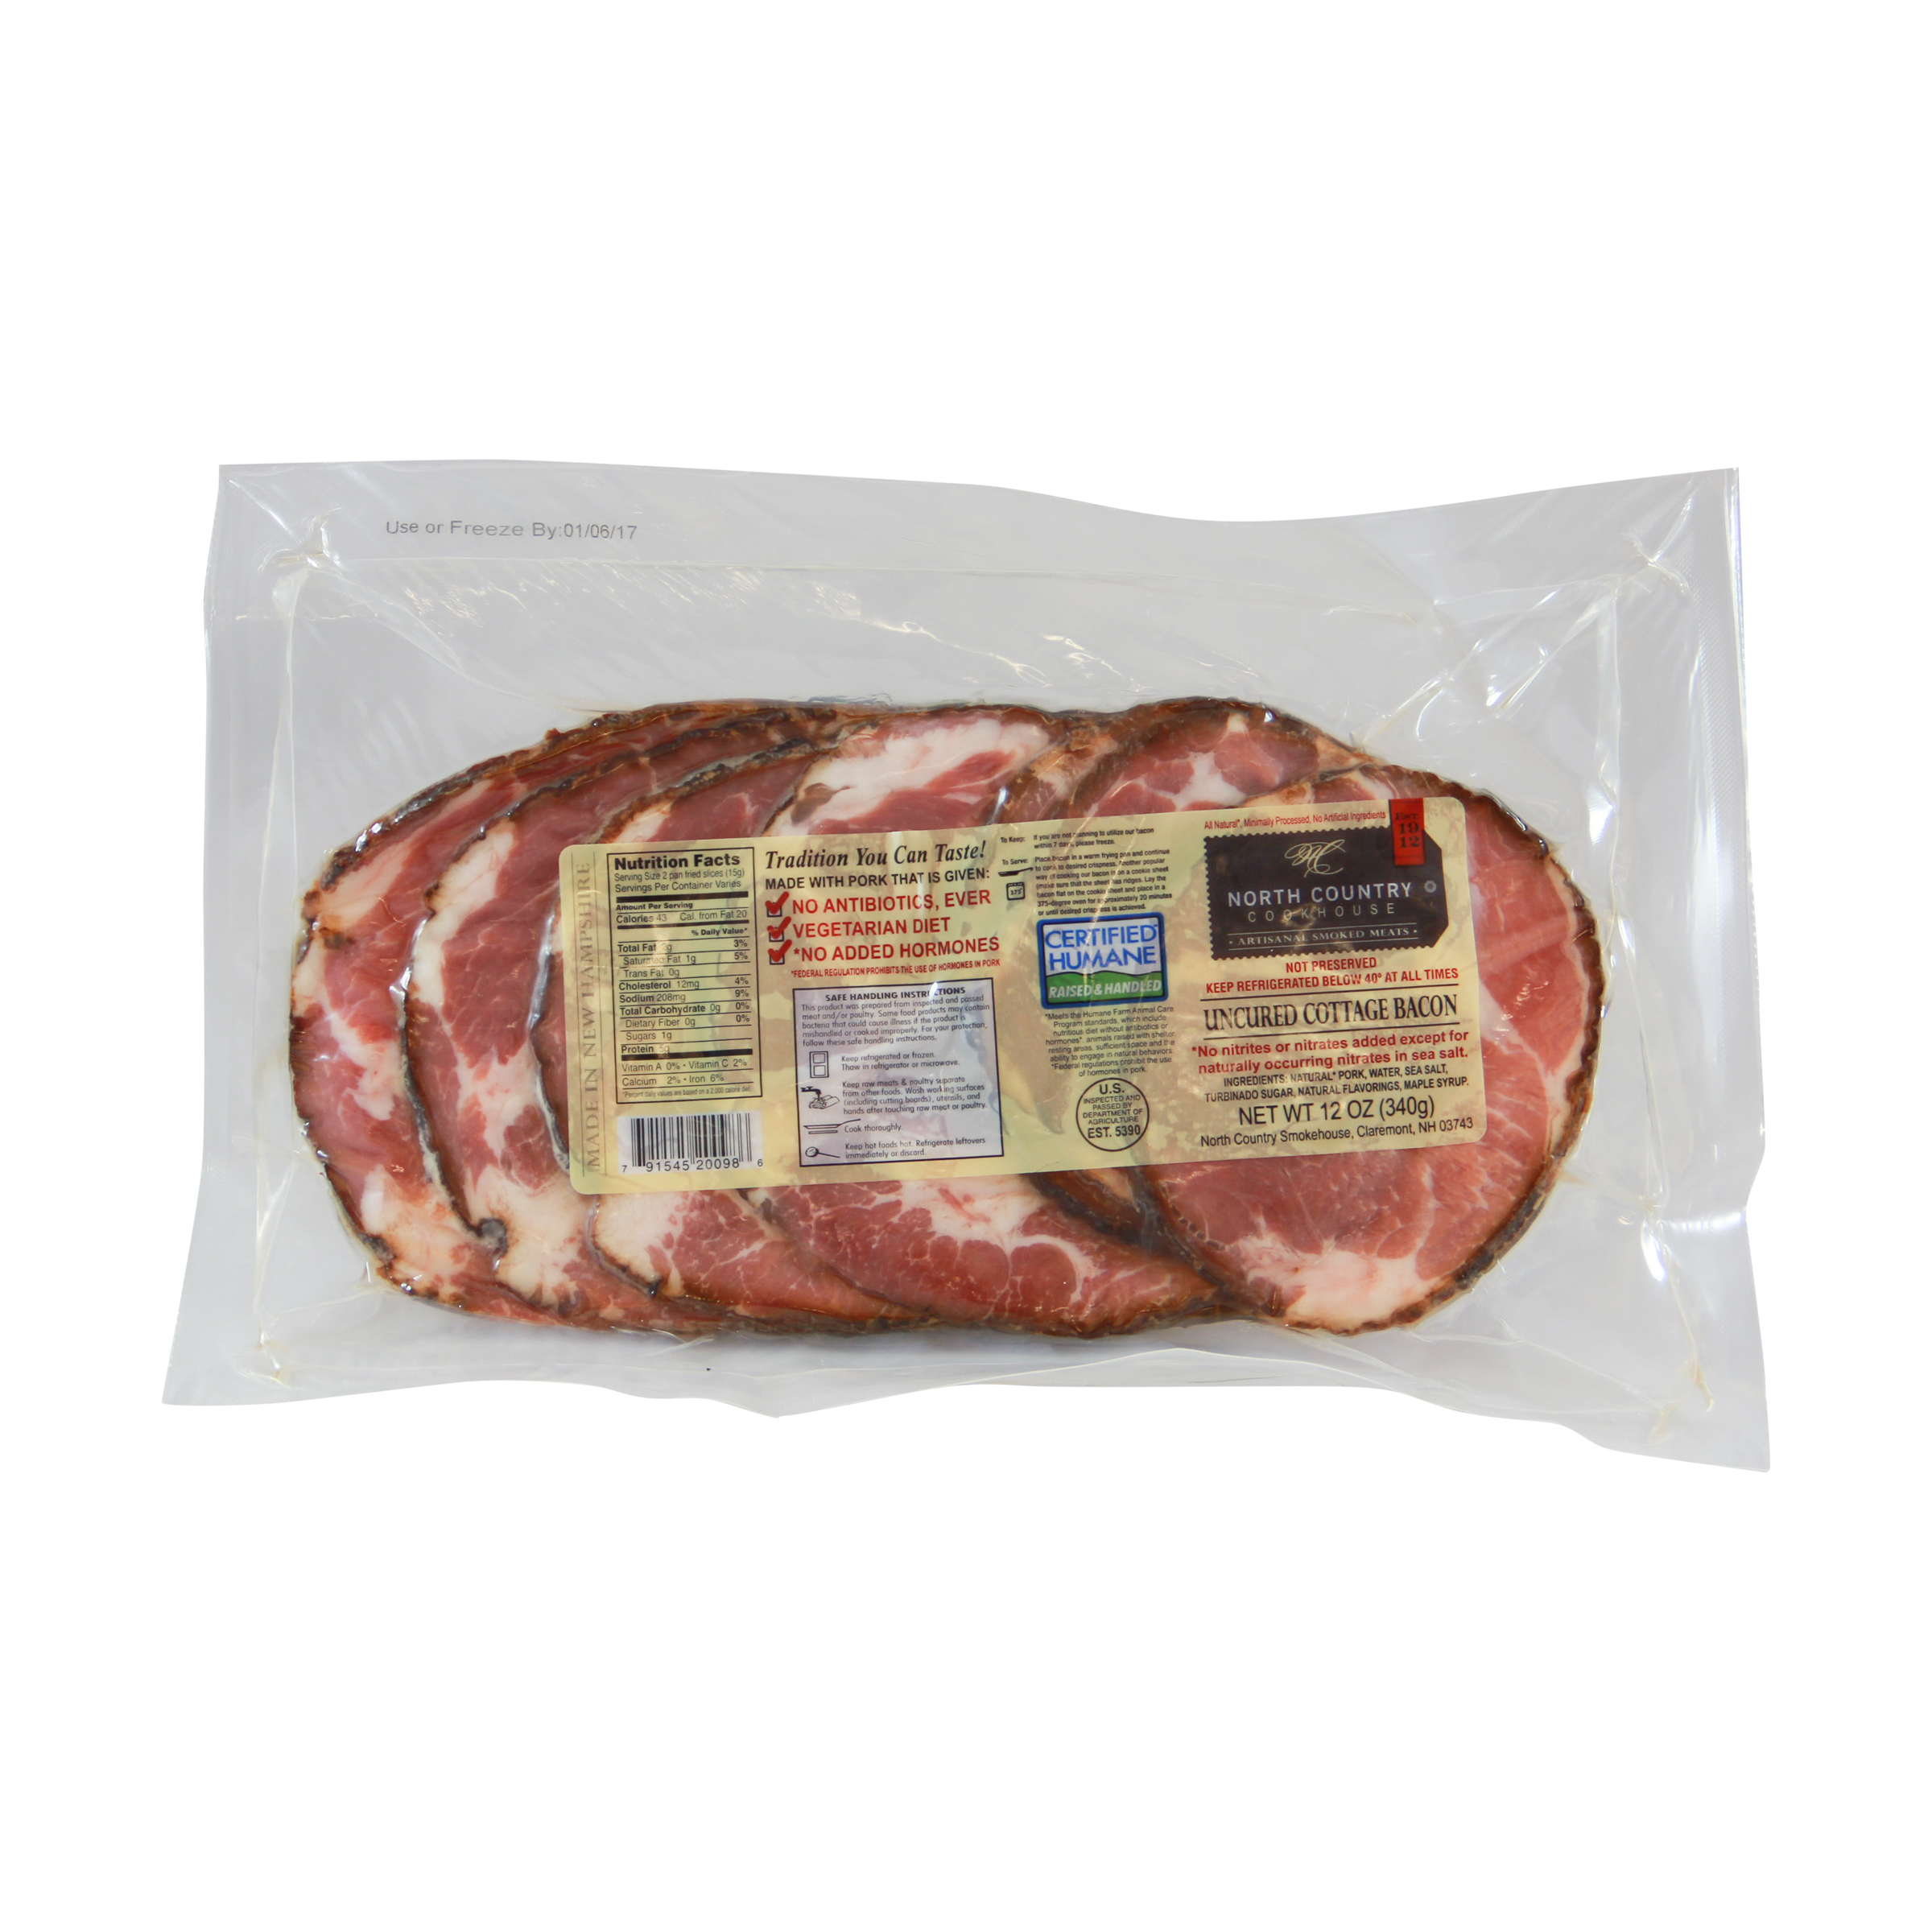 Uncured Cottage Bacon 12 Oz North Country Smokehouse Whole